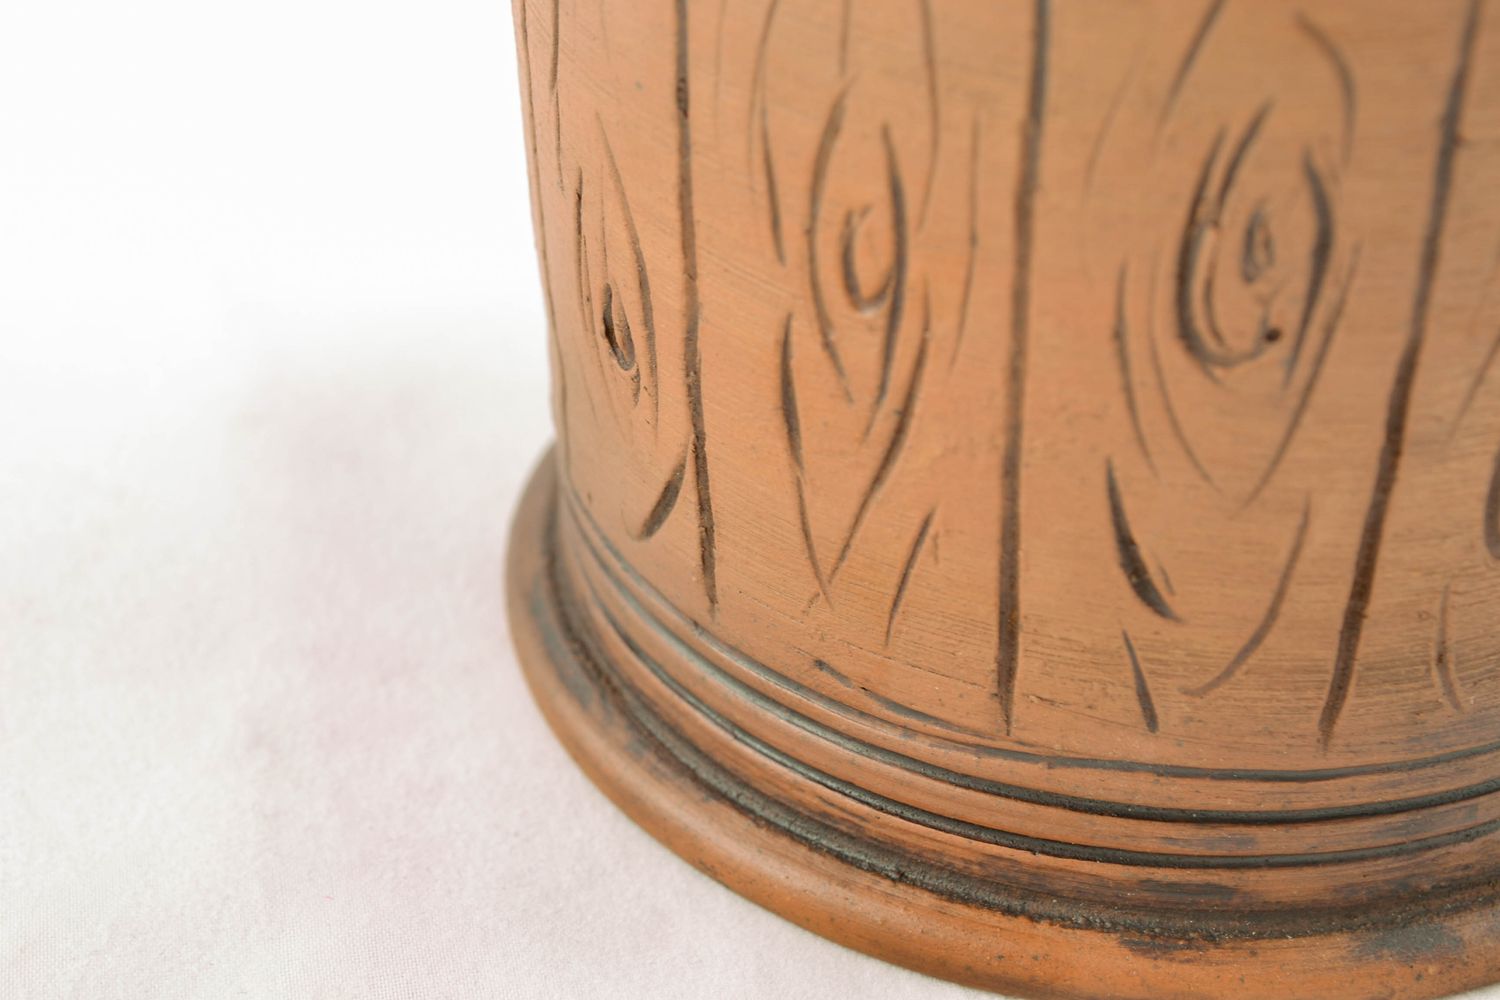 XXL 25 oz clay glazed cup with handle and pattern in a wooden style photo 5